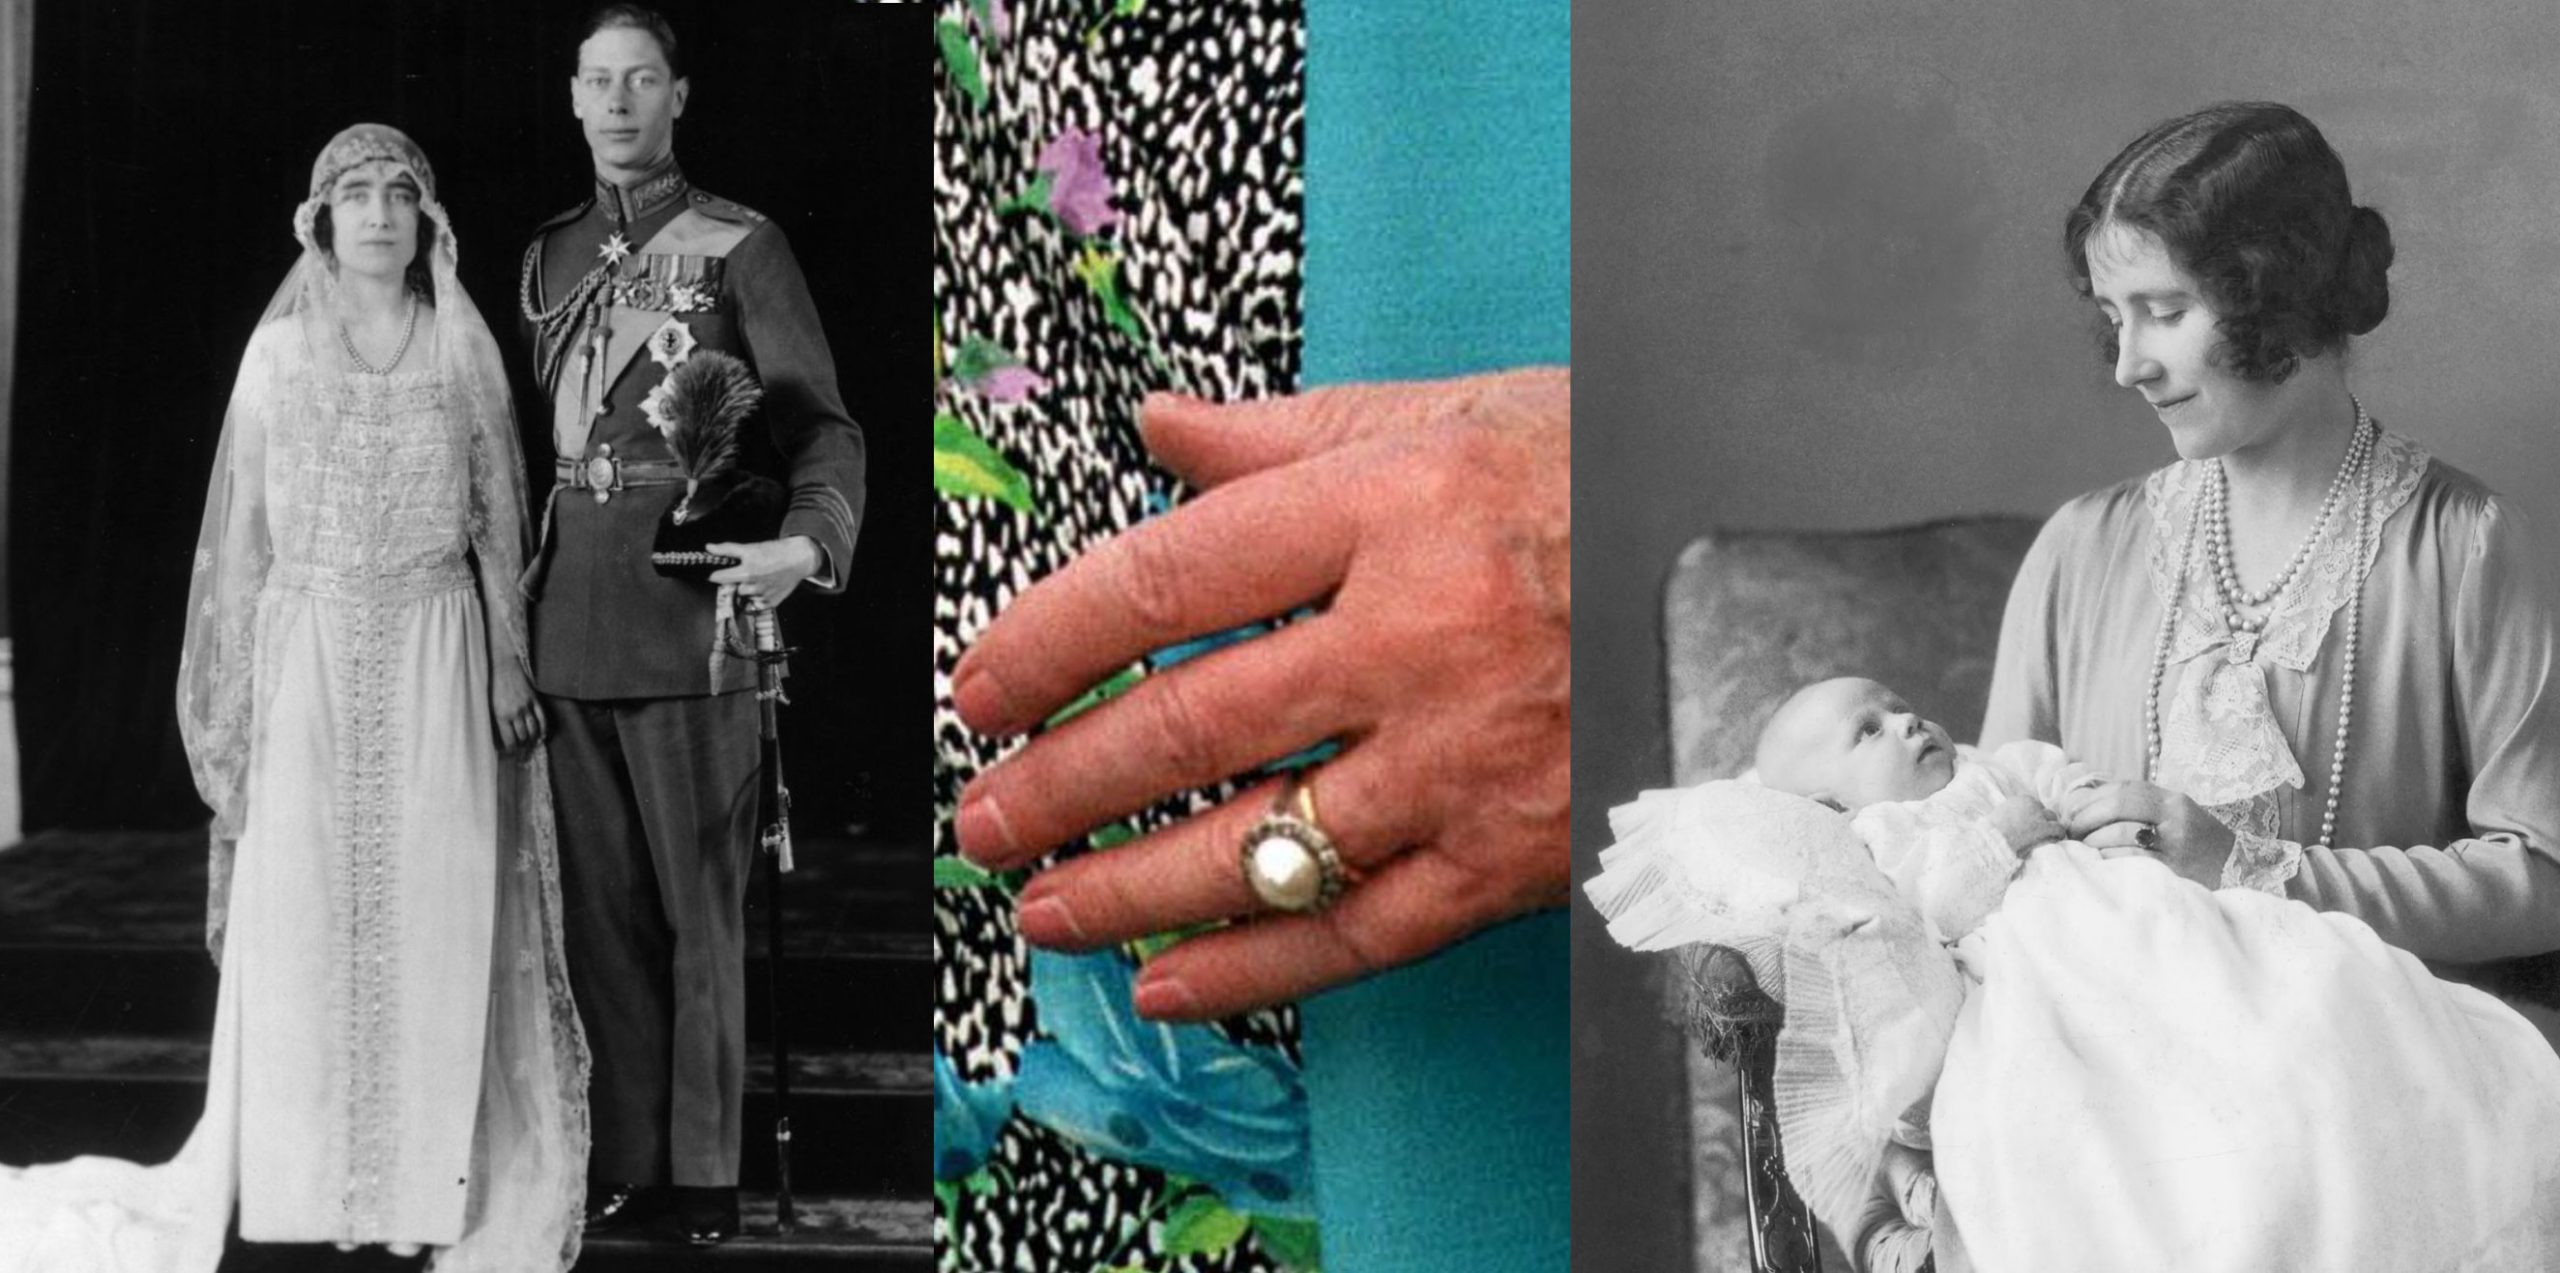 The Queen Mother engagement ring